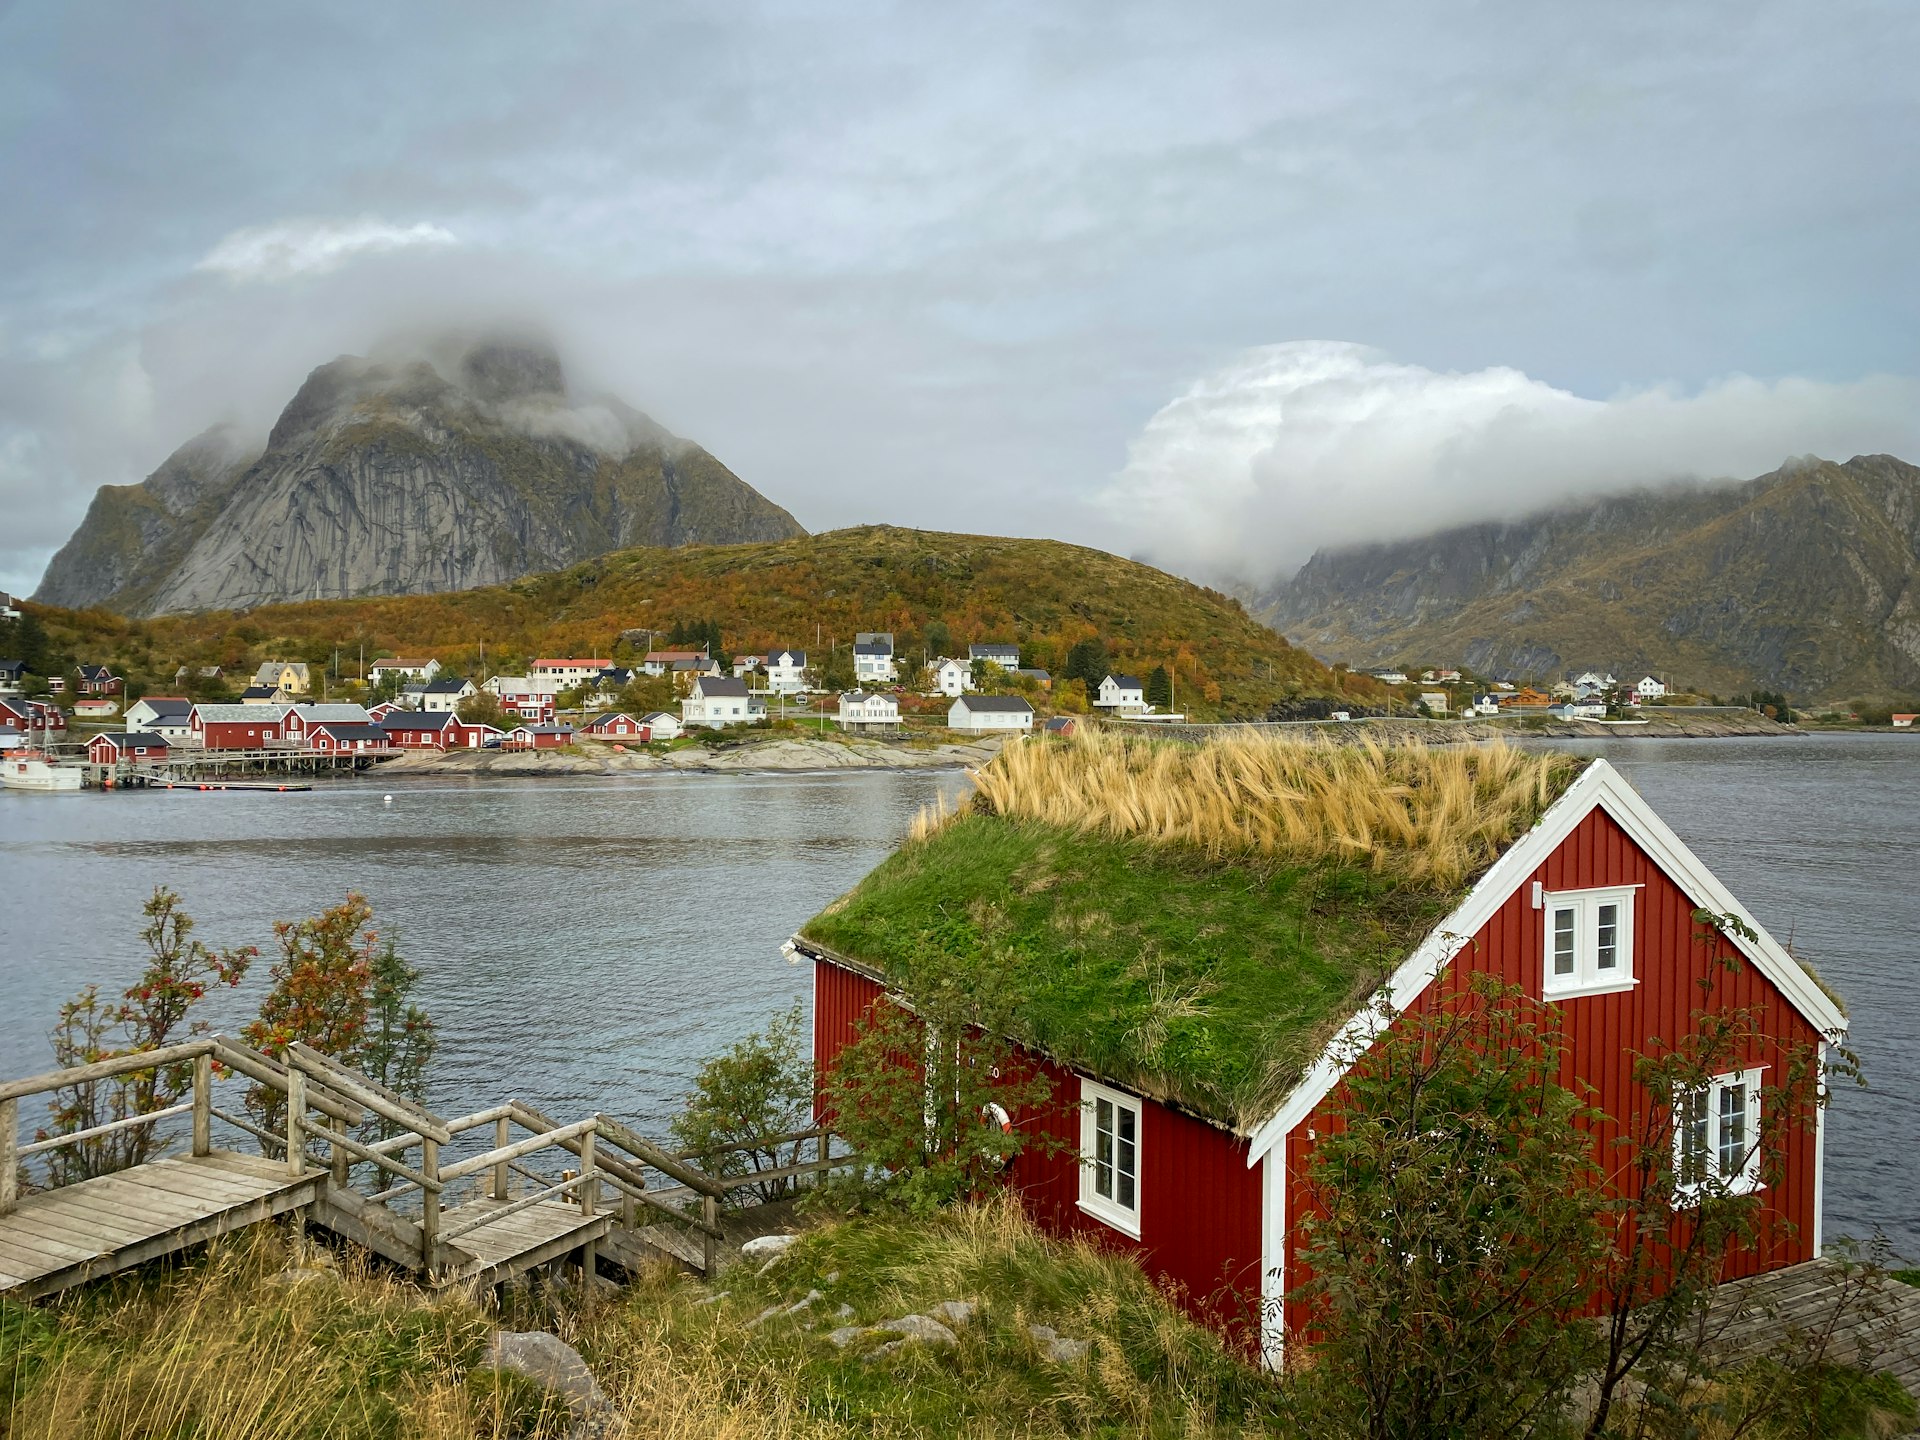 Traditional turf roof cottages in Lofoten Islands